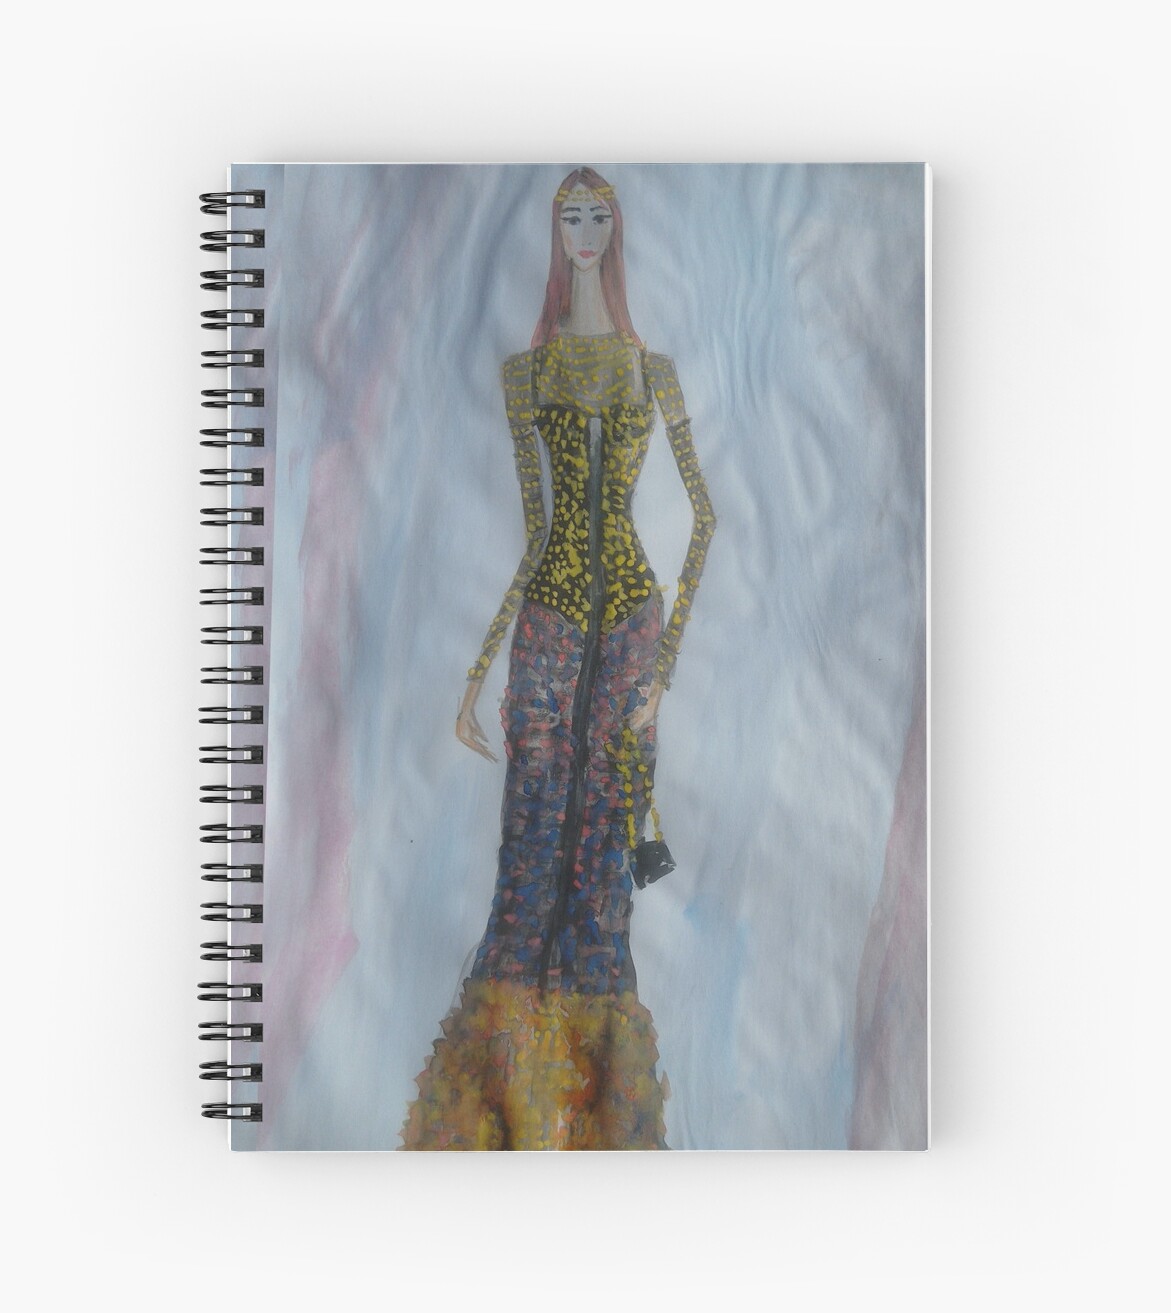 Royal Beauty Glam Gown (Fashion Illustration) by IvanaKada